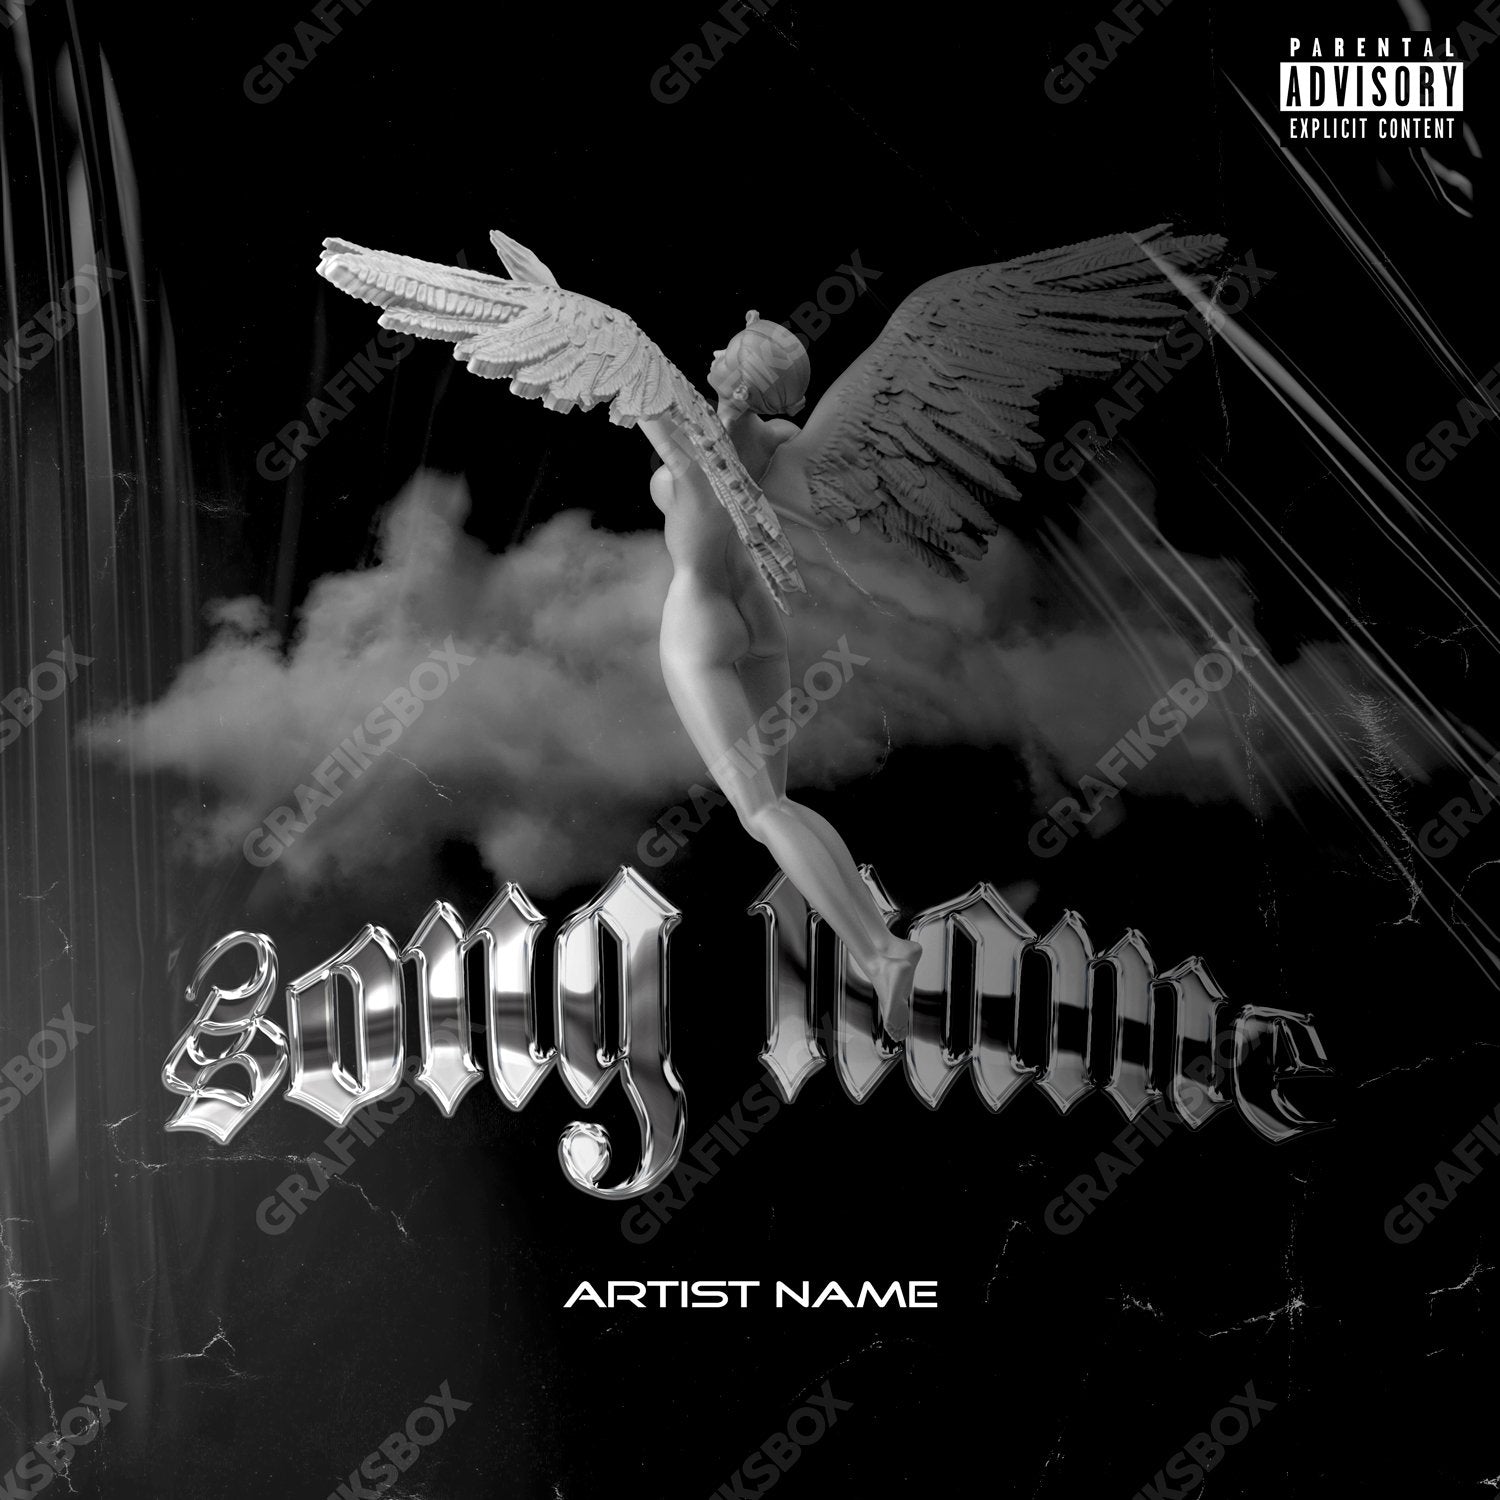 Angel Wings premade cover art